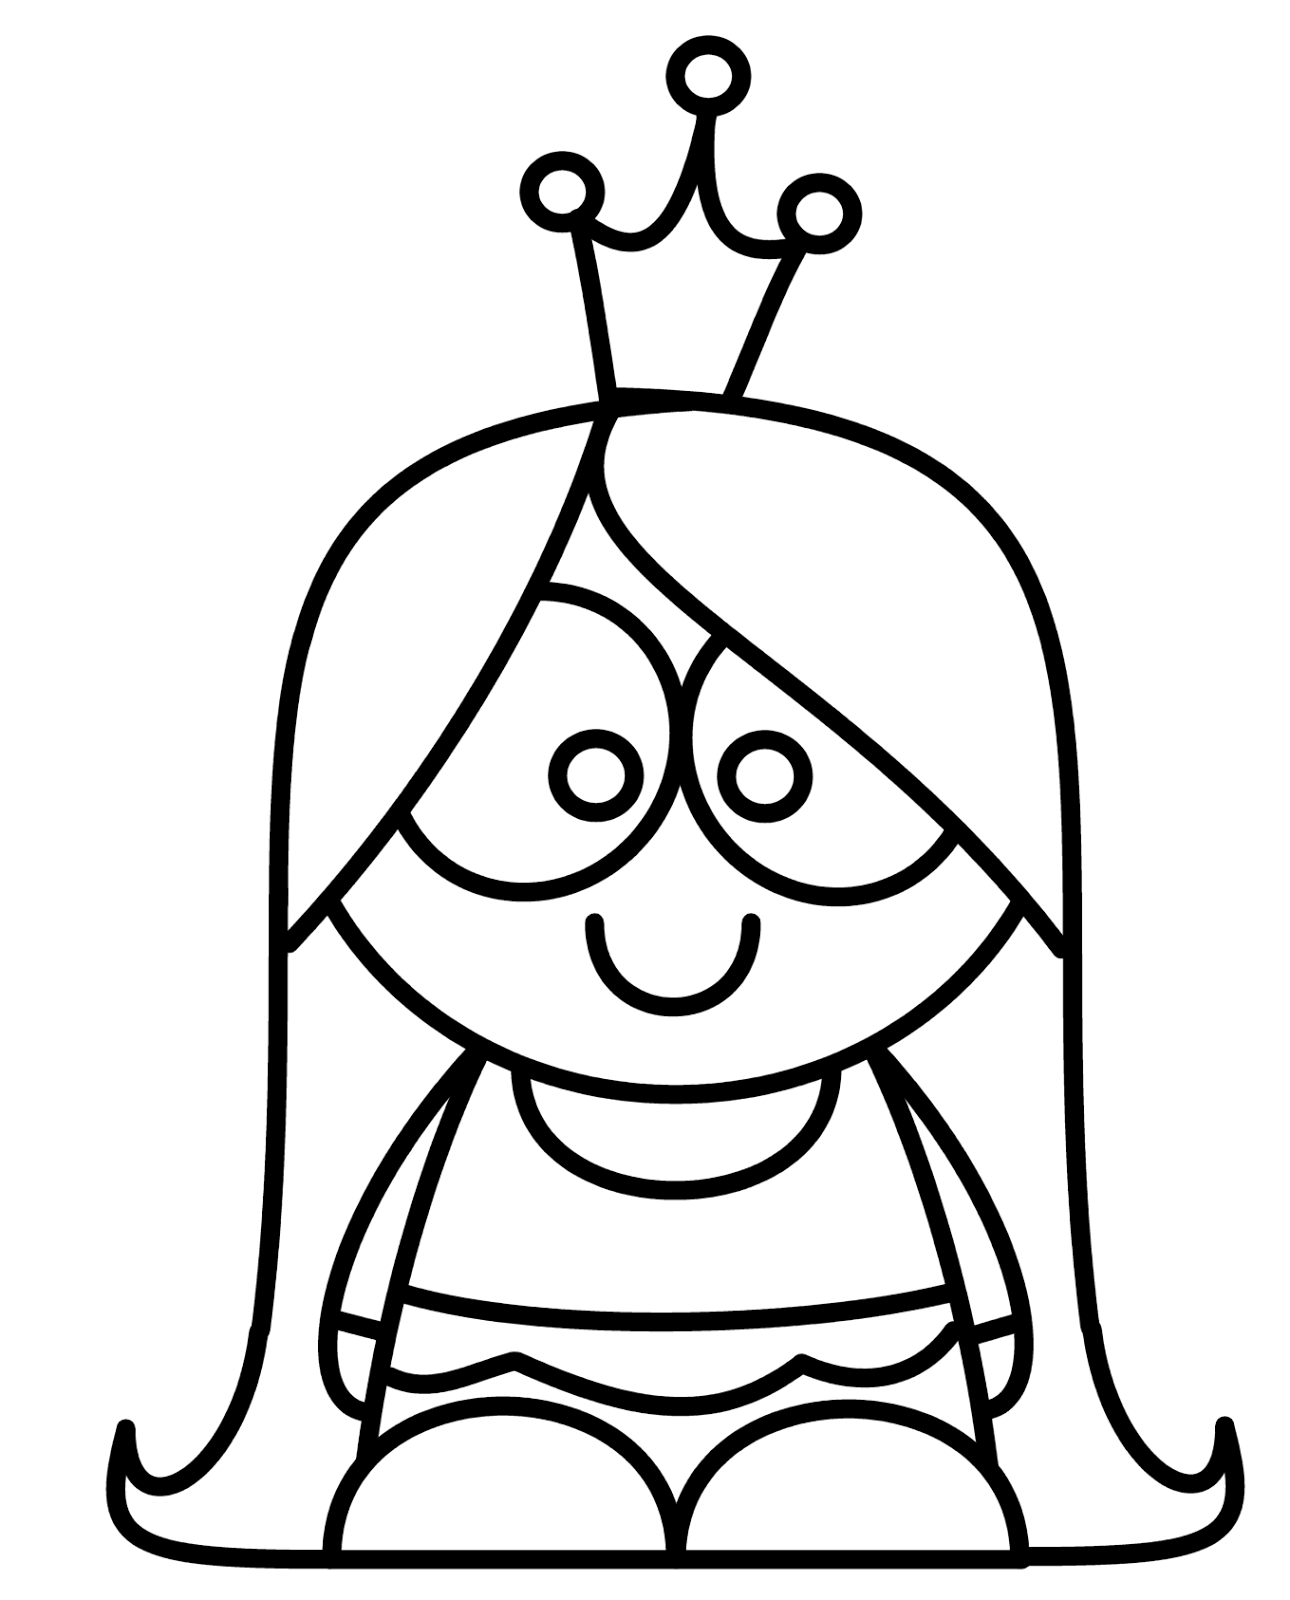 New How To Draw Princess Sketch for Kindergarten